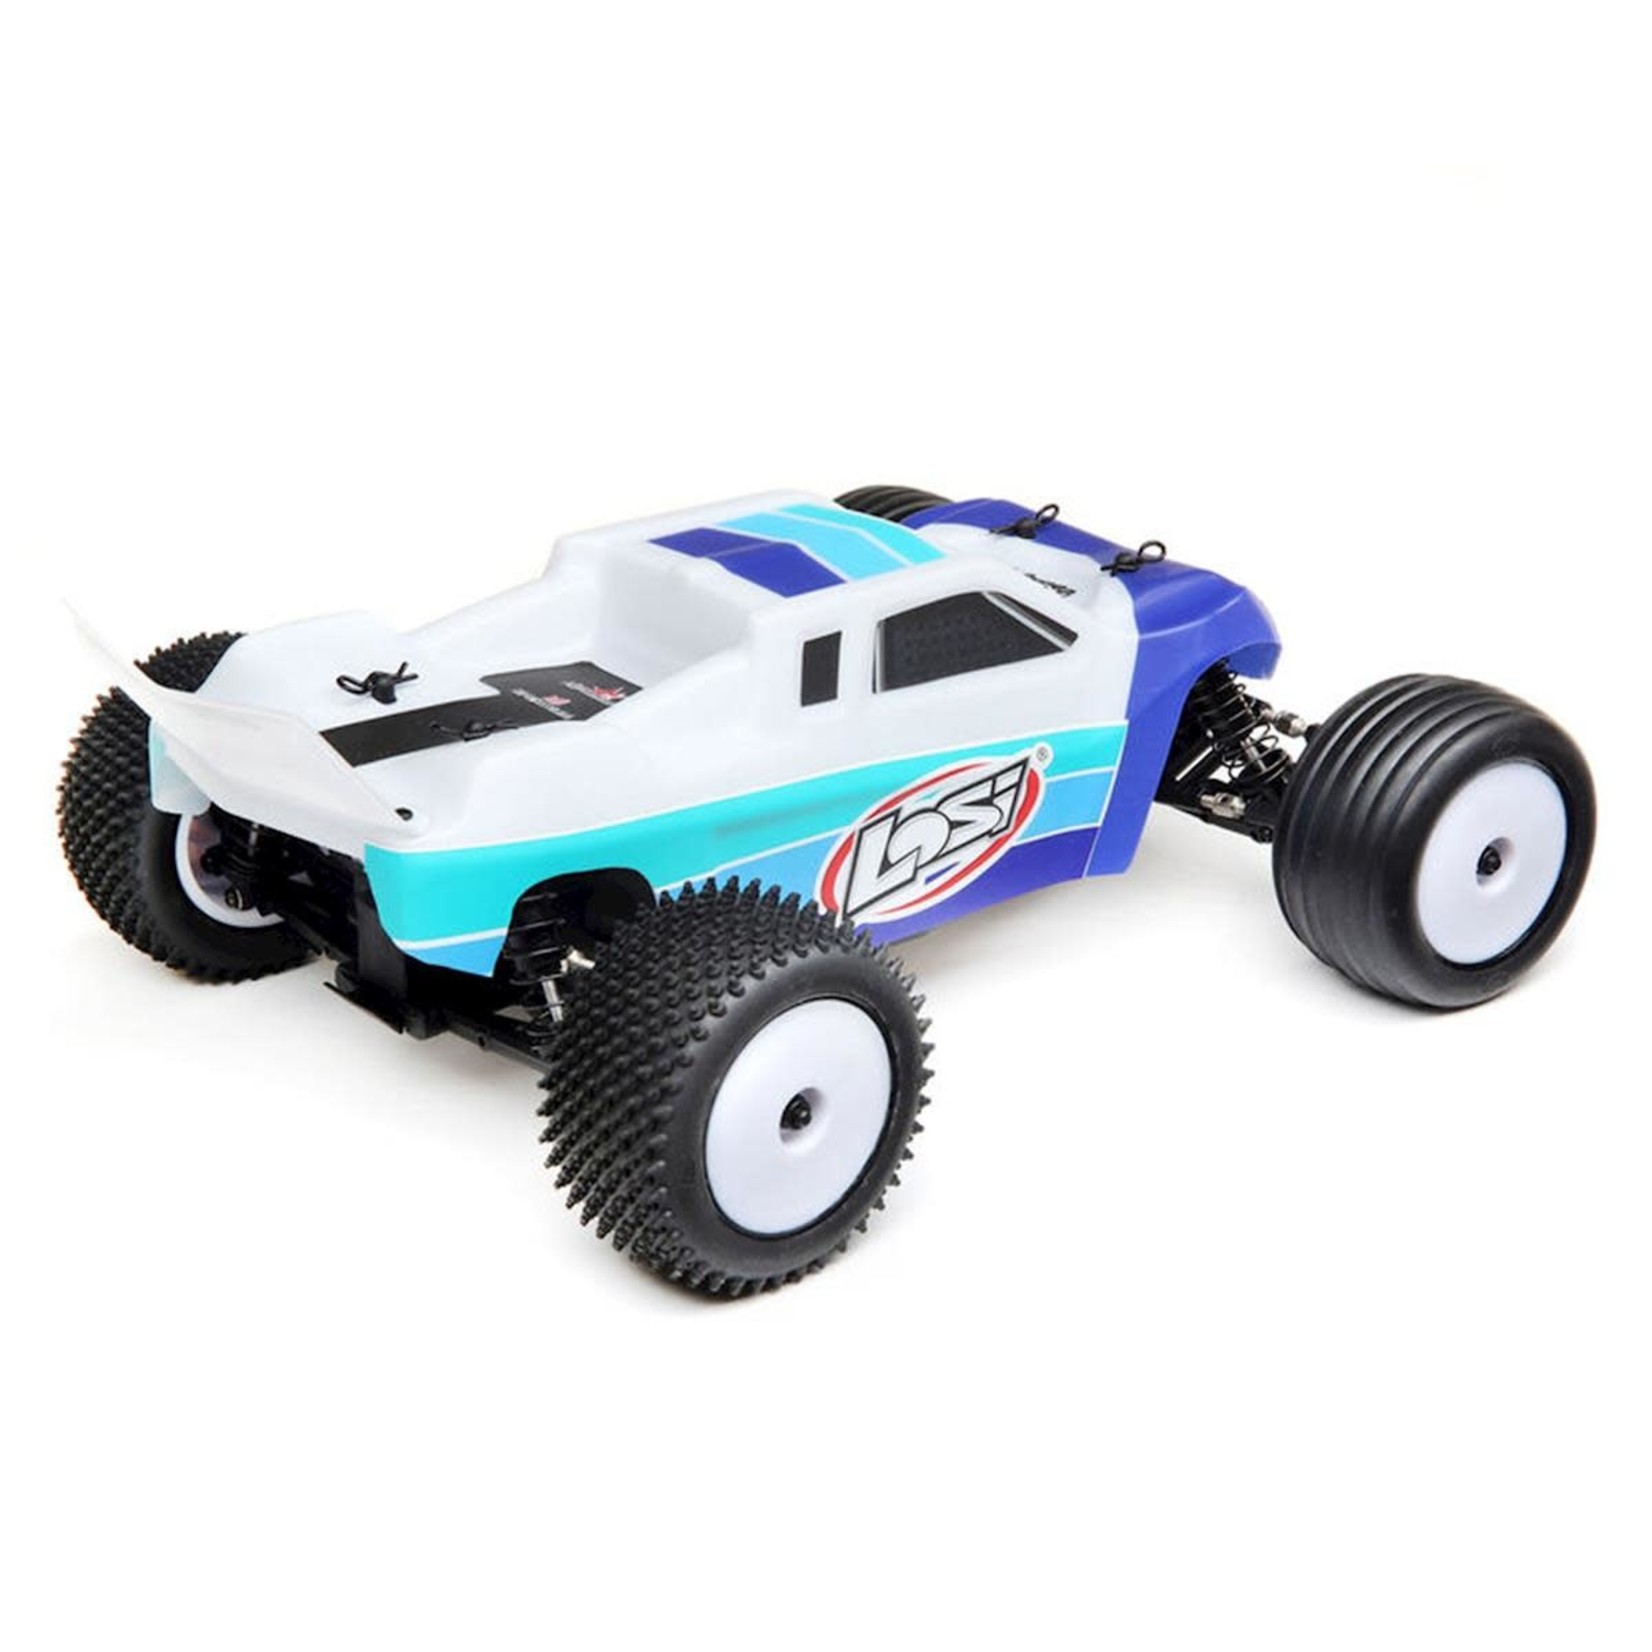 Losi Losi Mini-T 2.0 1/18 RTR 2WD Brushless Stadium Truck (Blue) w/2.4GHz Radio, Battery & Charger #LOS01019T2